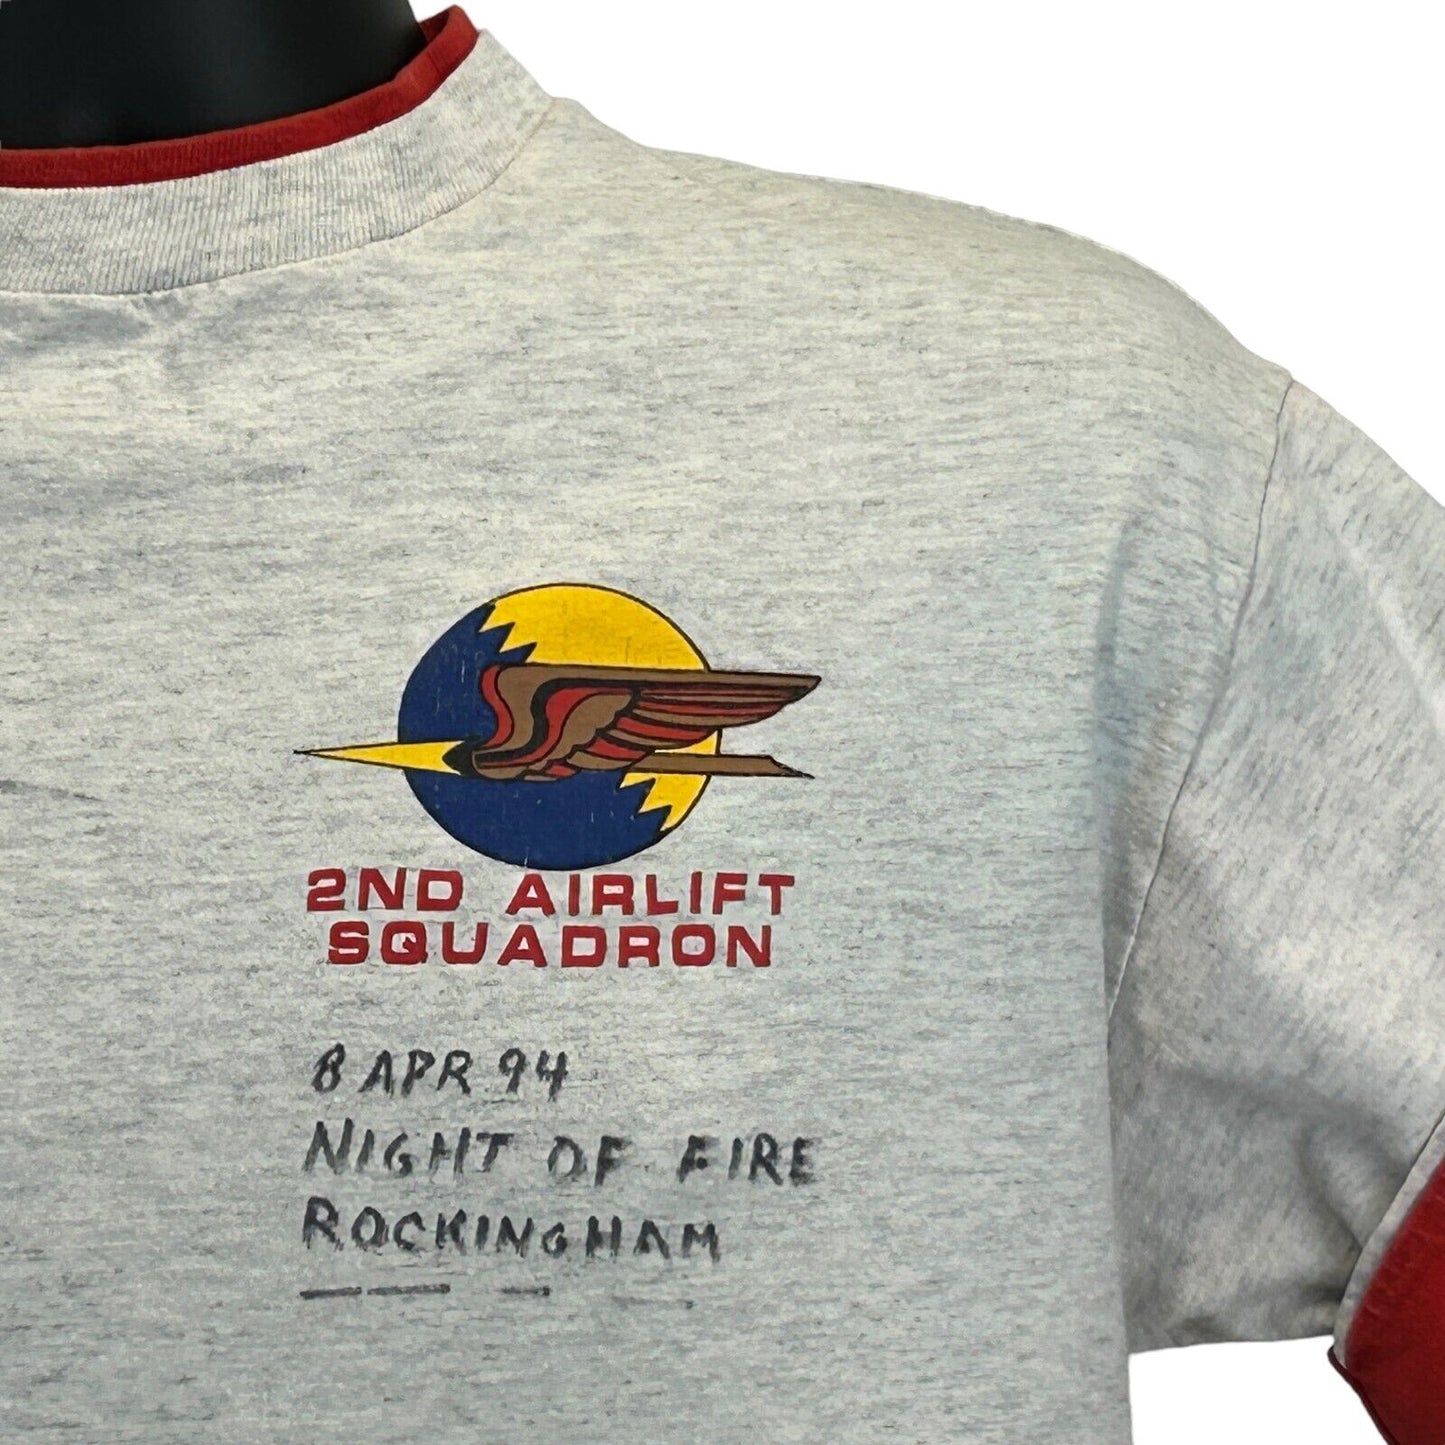 Night of Fire Rockingham Signed Vintage 90s T Shirt 2nd Airlift Squadron Large